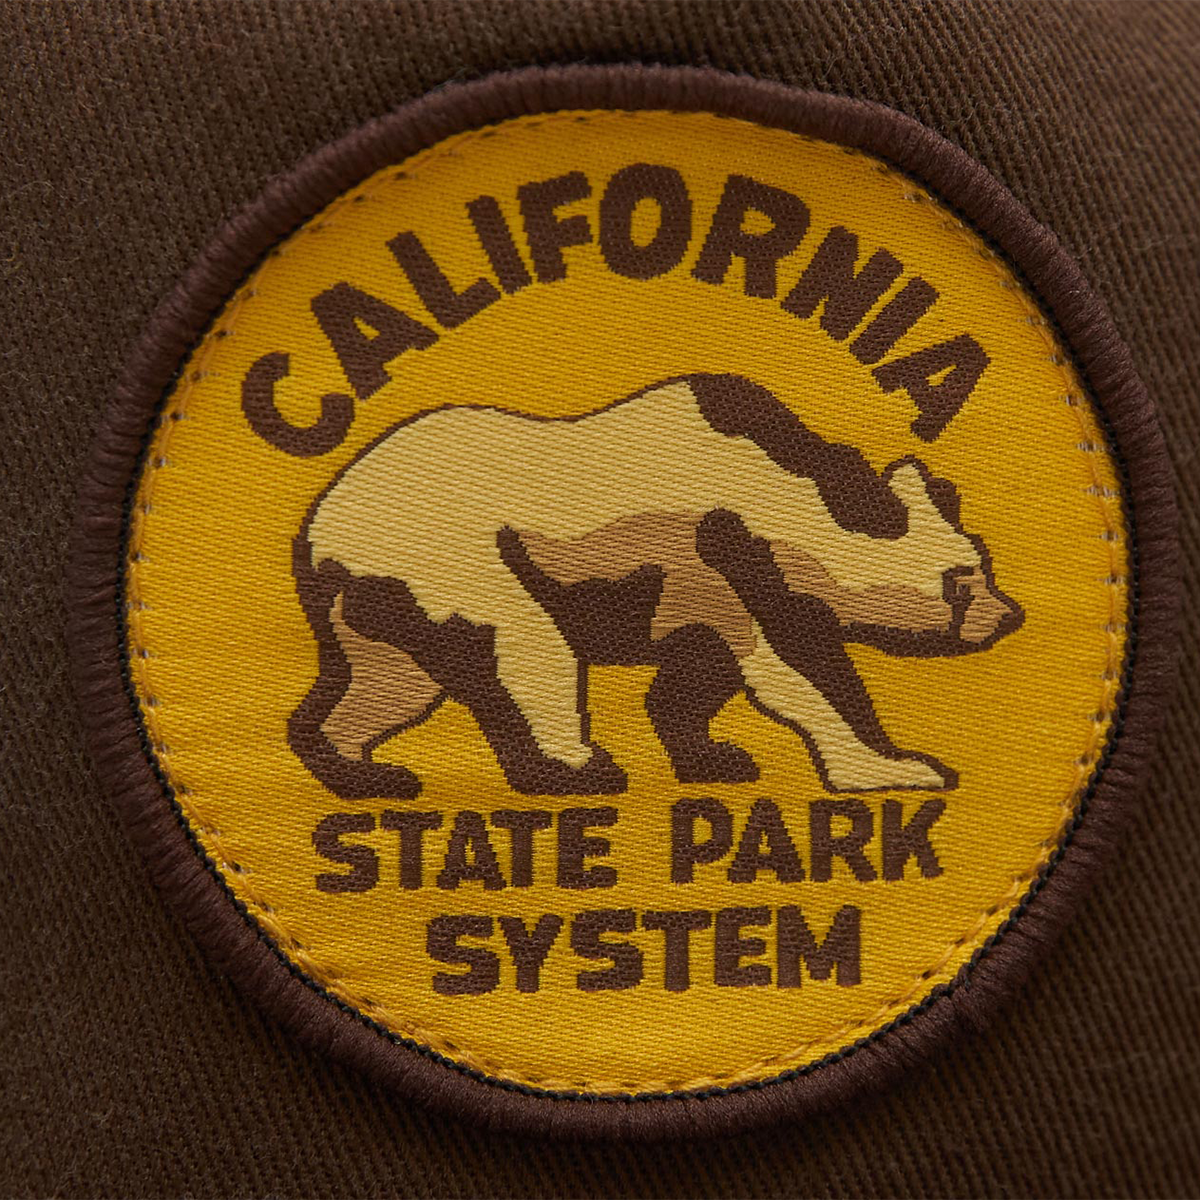 California State Park System Vintage Bear Patch Hat alternate view